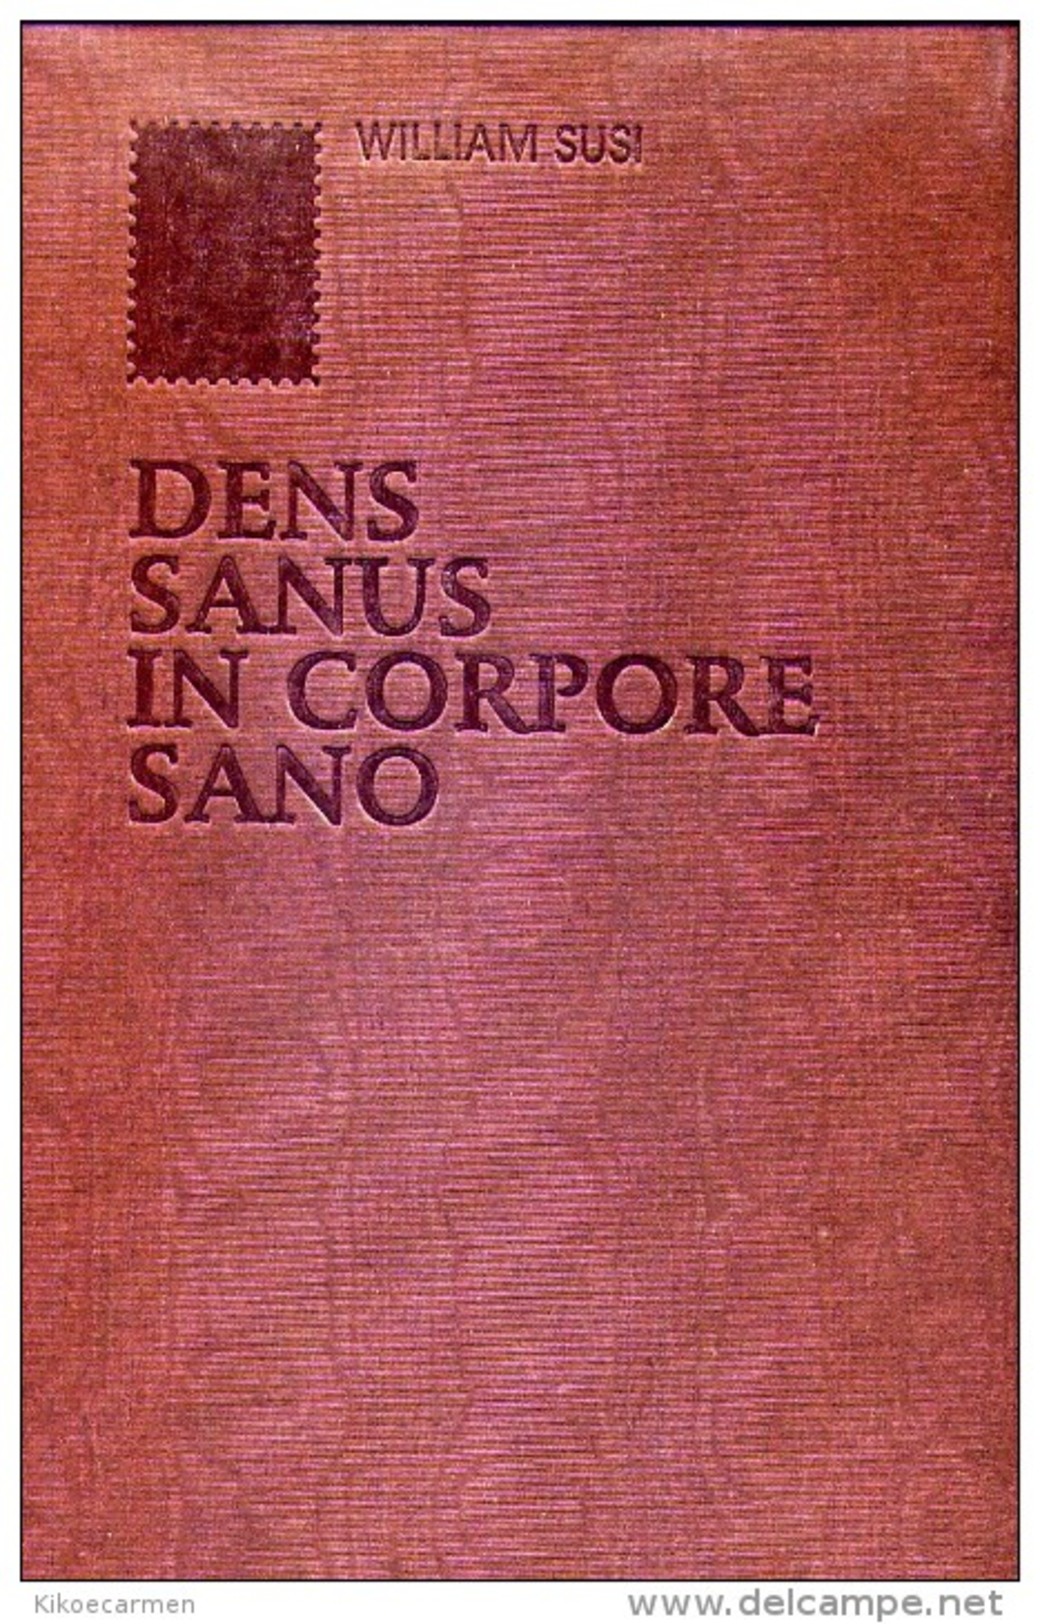 DENTISTRY IN STAMPS, DENS SANUS 192 Black And White Pages- Dental Dent Teeth Tooth Mouth Medicine Zahn Diente Dentale - Topics